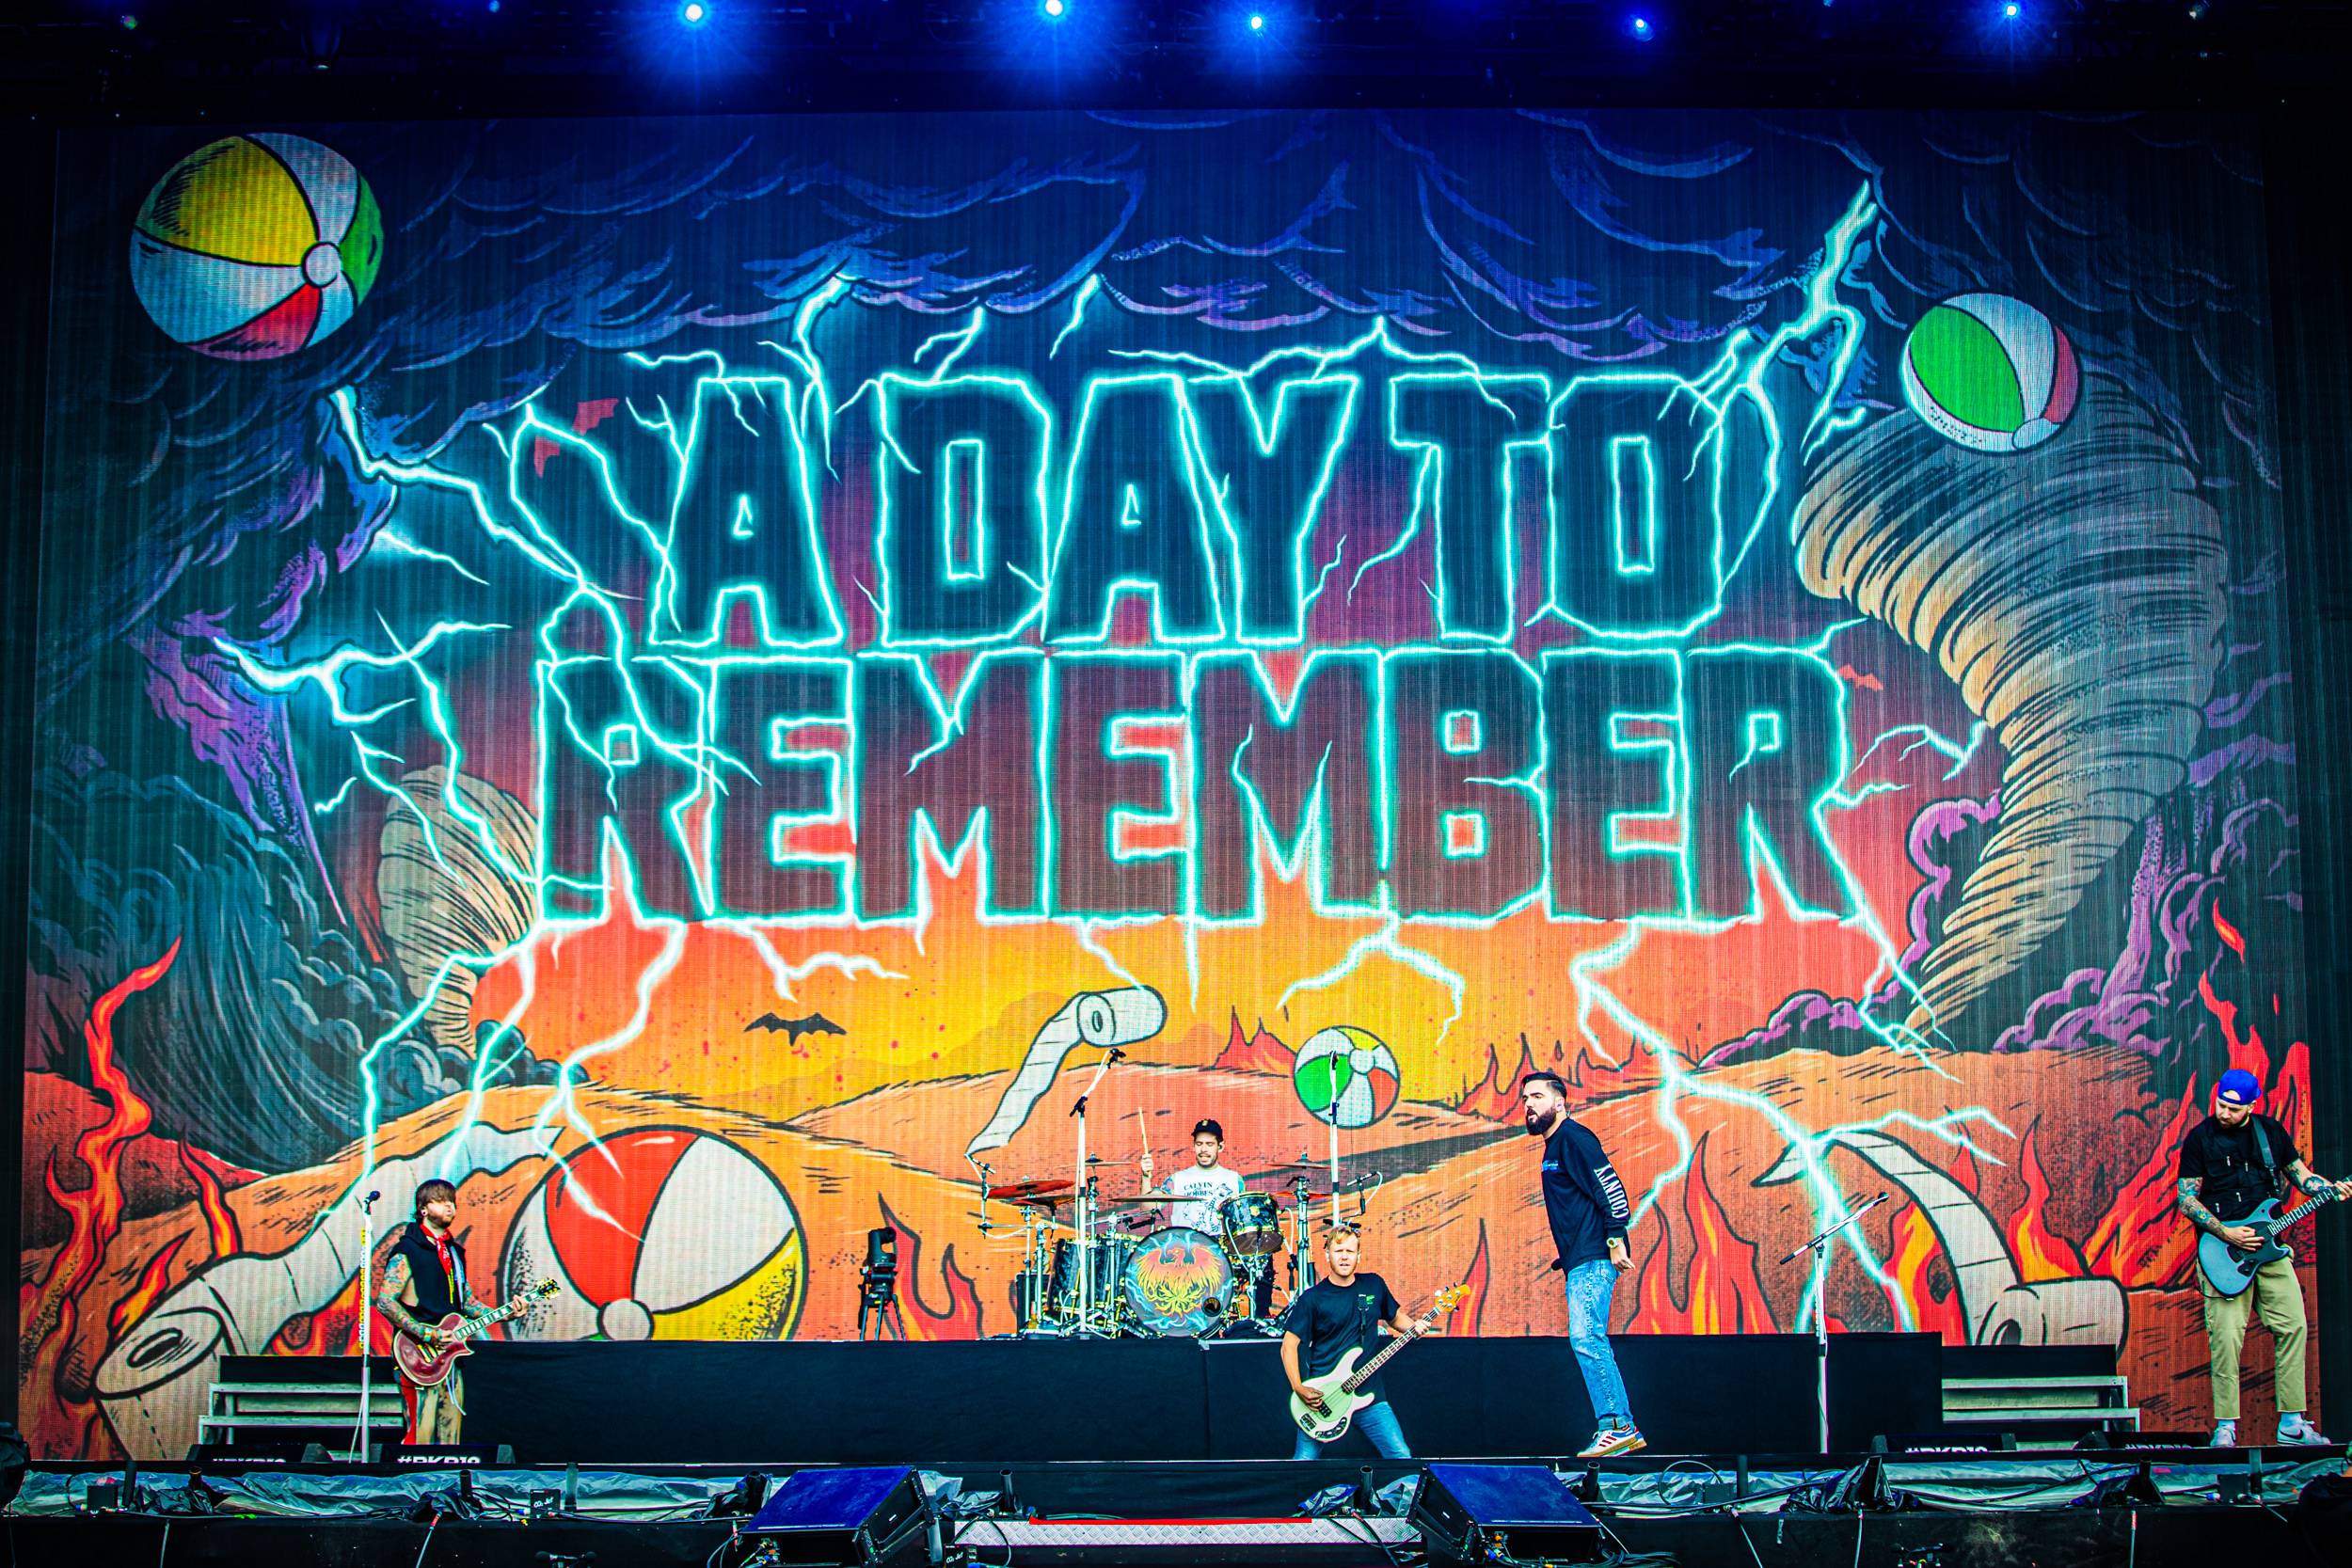 A day to remember